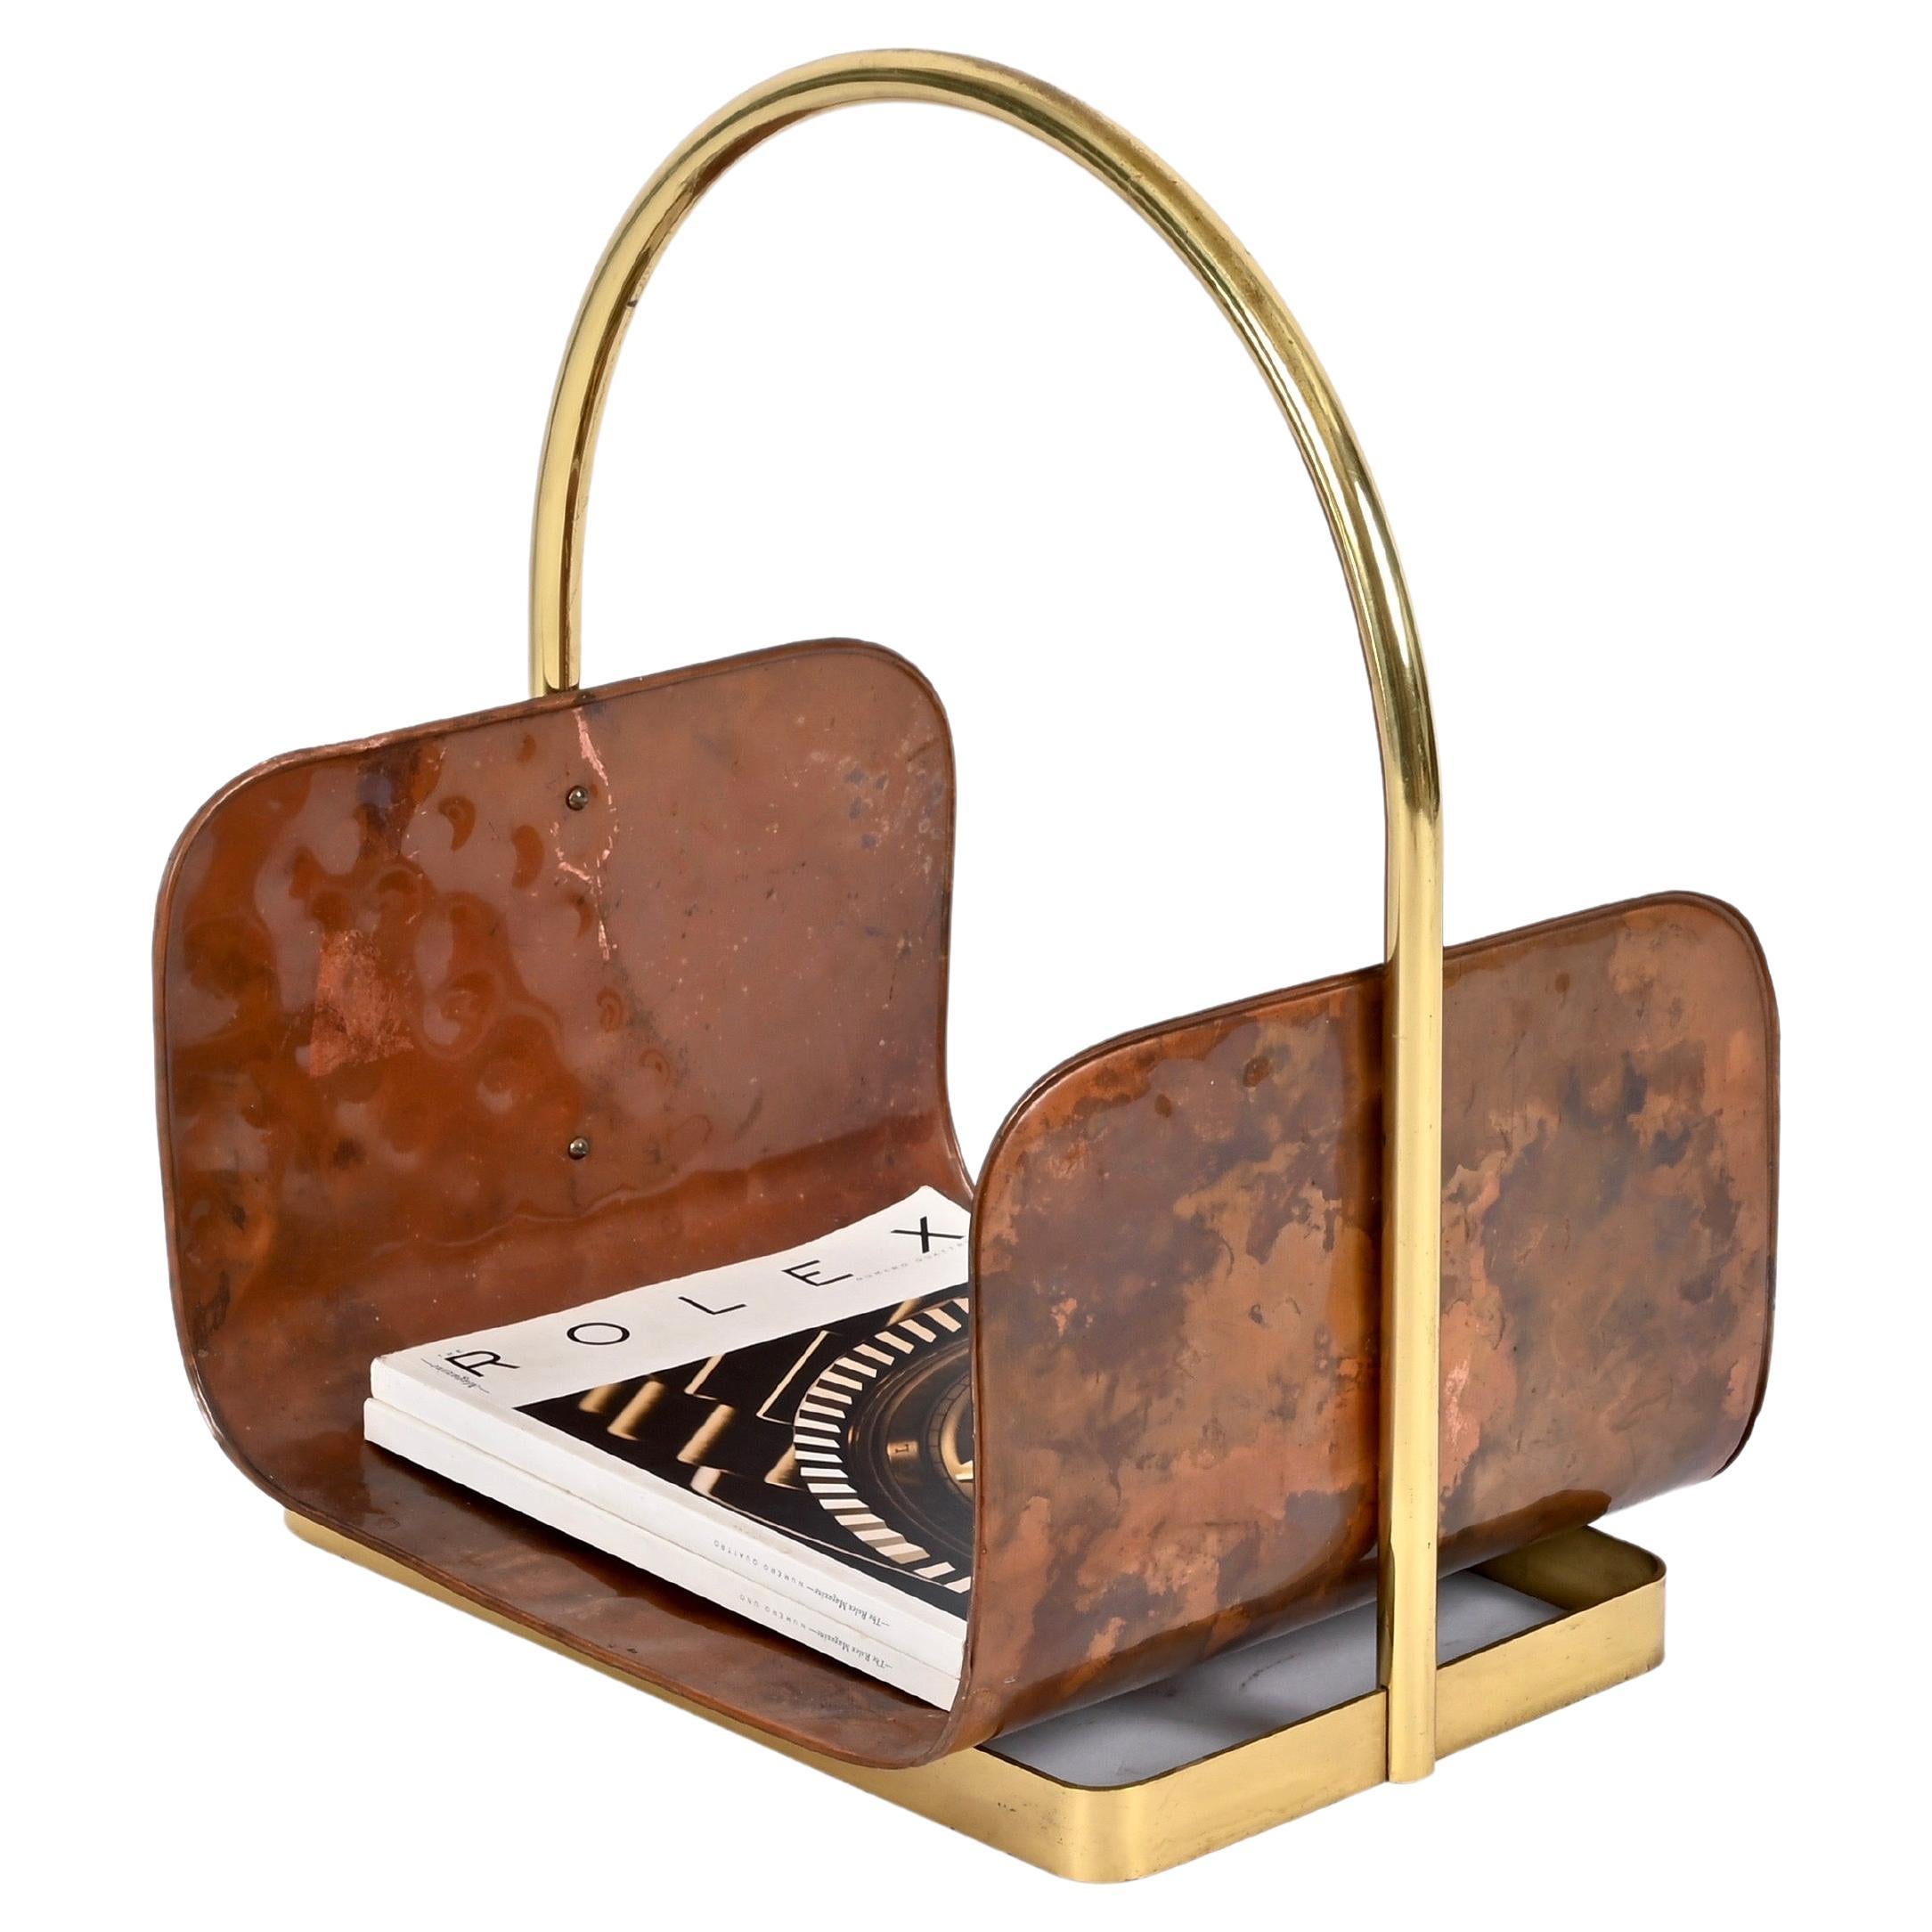 Midcentury Italian Magazine Rack in Hammered Copper and Brass, Italy 1970s For Sale